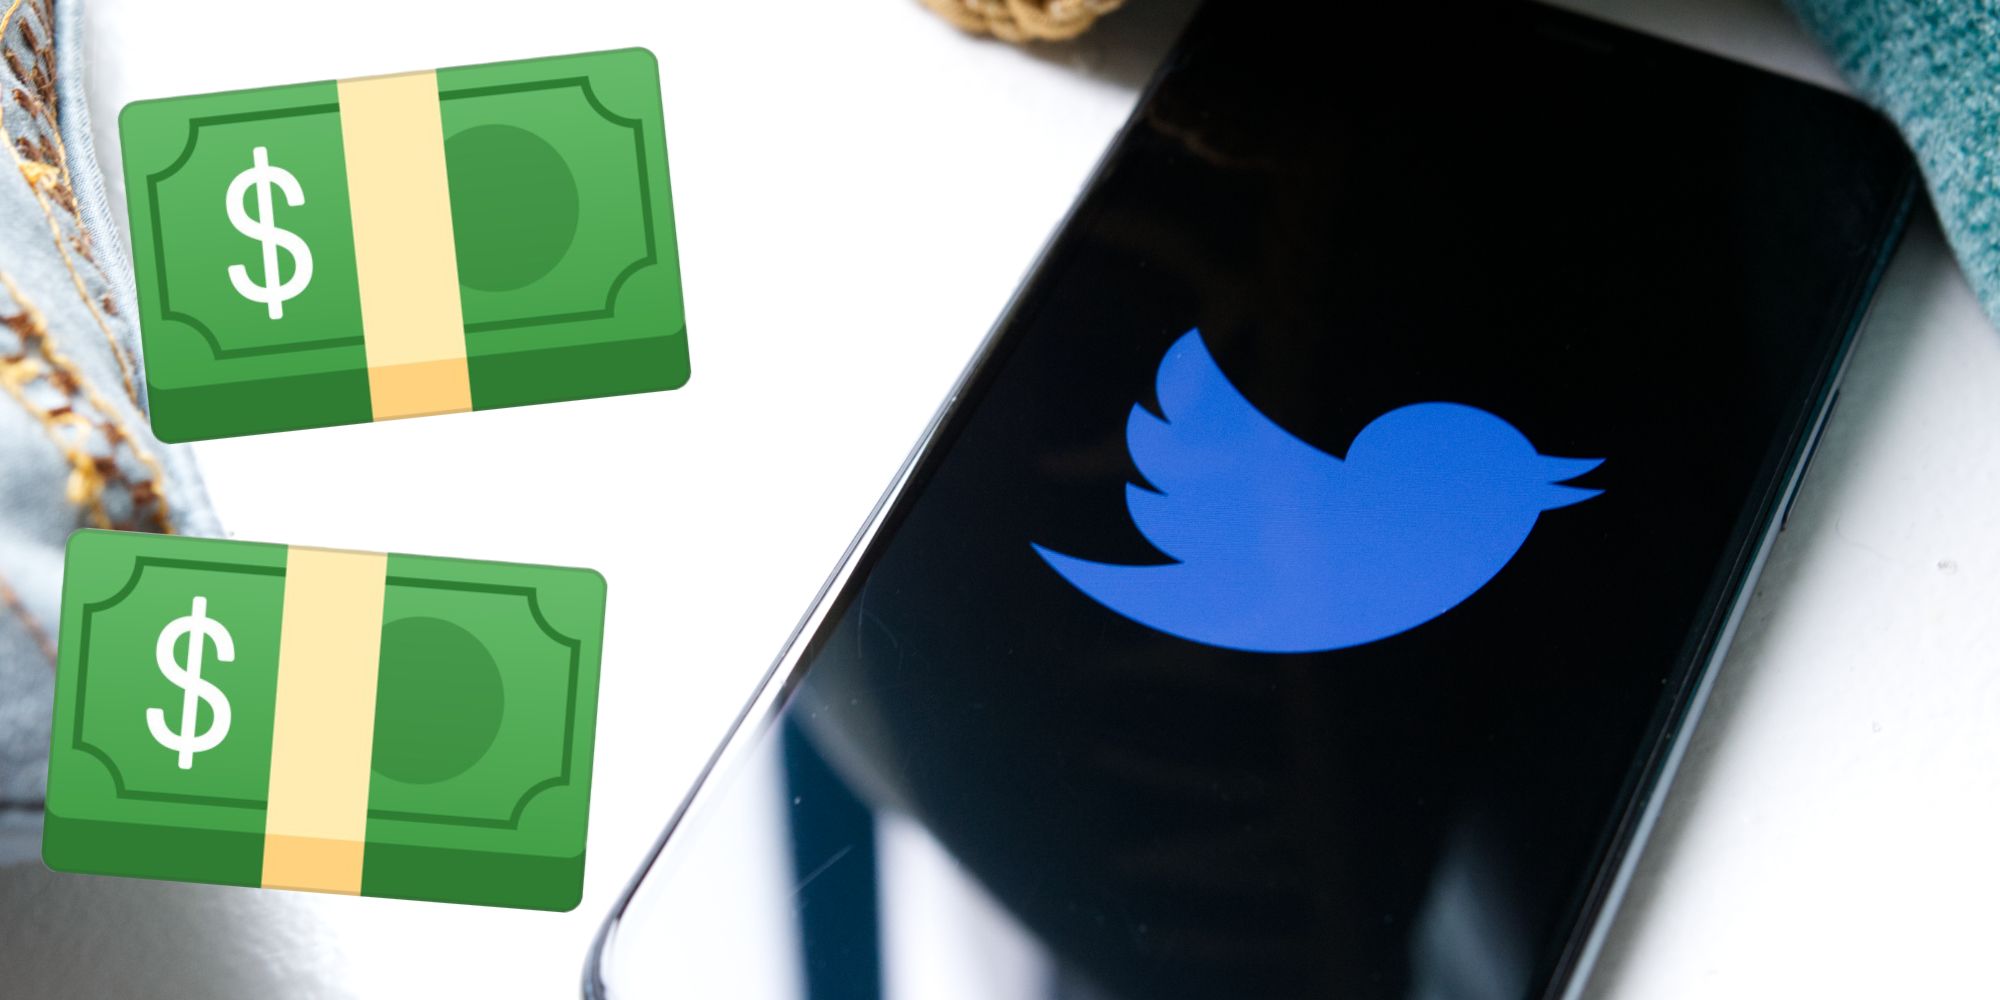 Twitter icon on an iPhone with money emoji